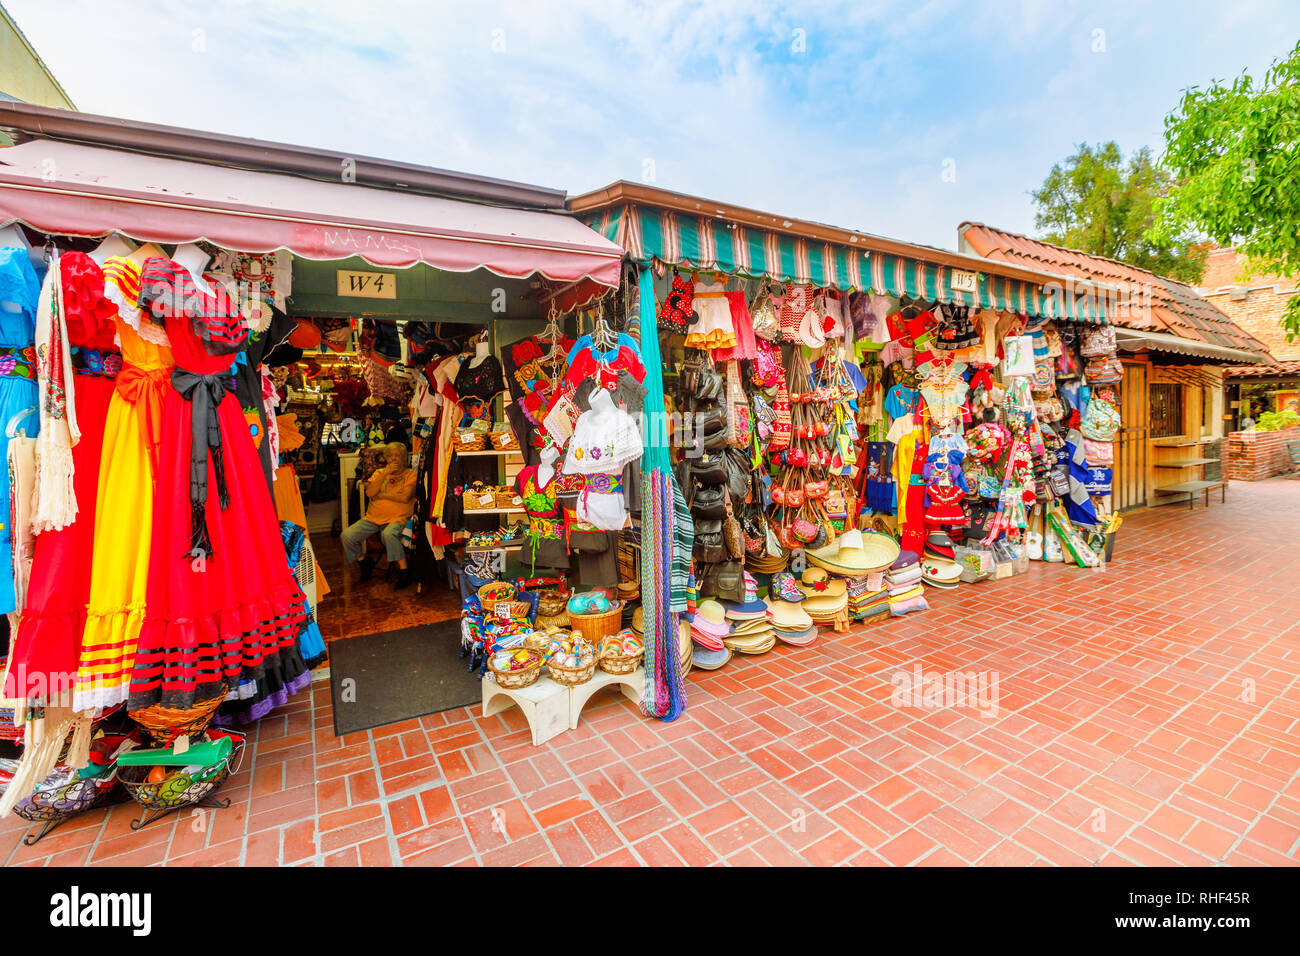 Los Angeles, California, United States - August 9, 2018: souvenirs stalls, a traditional market, Olvera Street, the oldest part of downtown LA, El Stock Photo